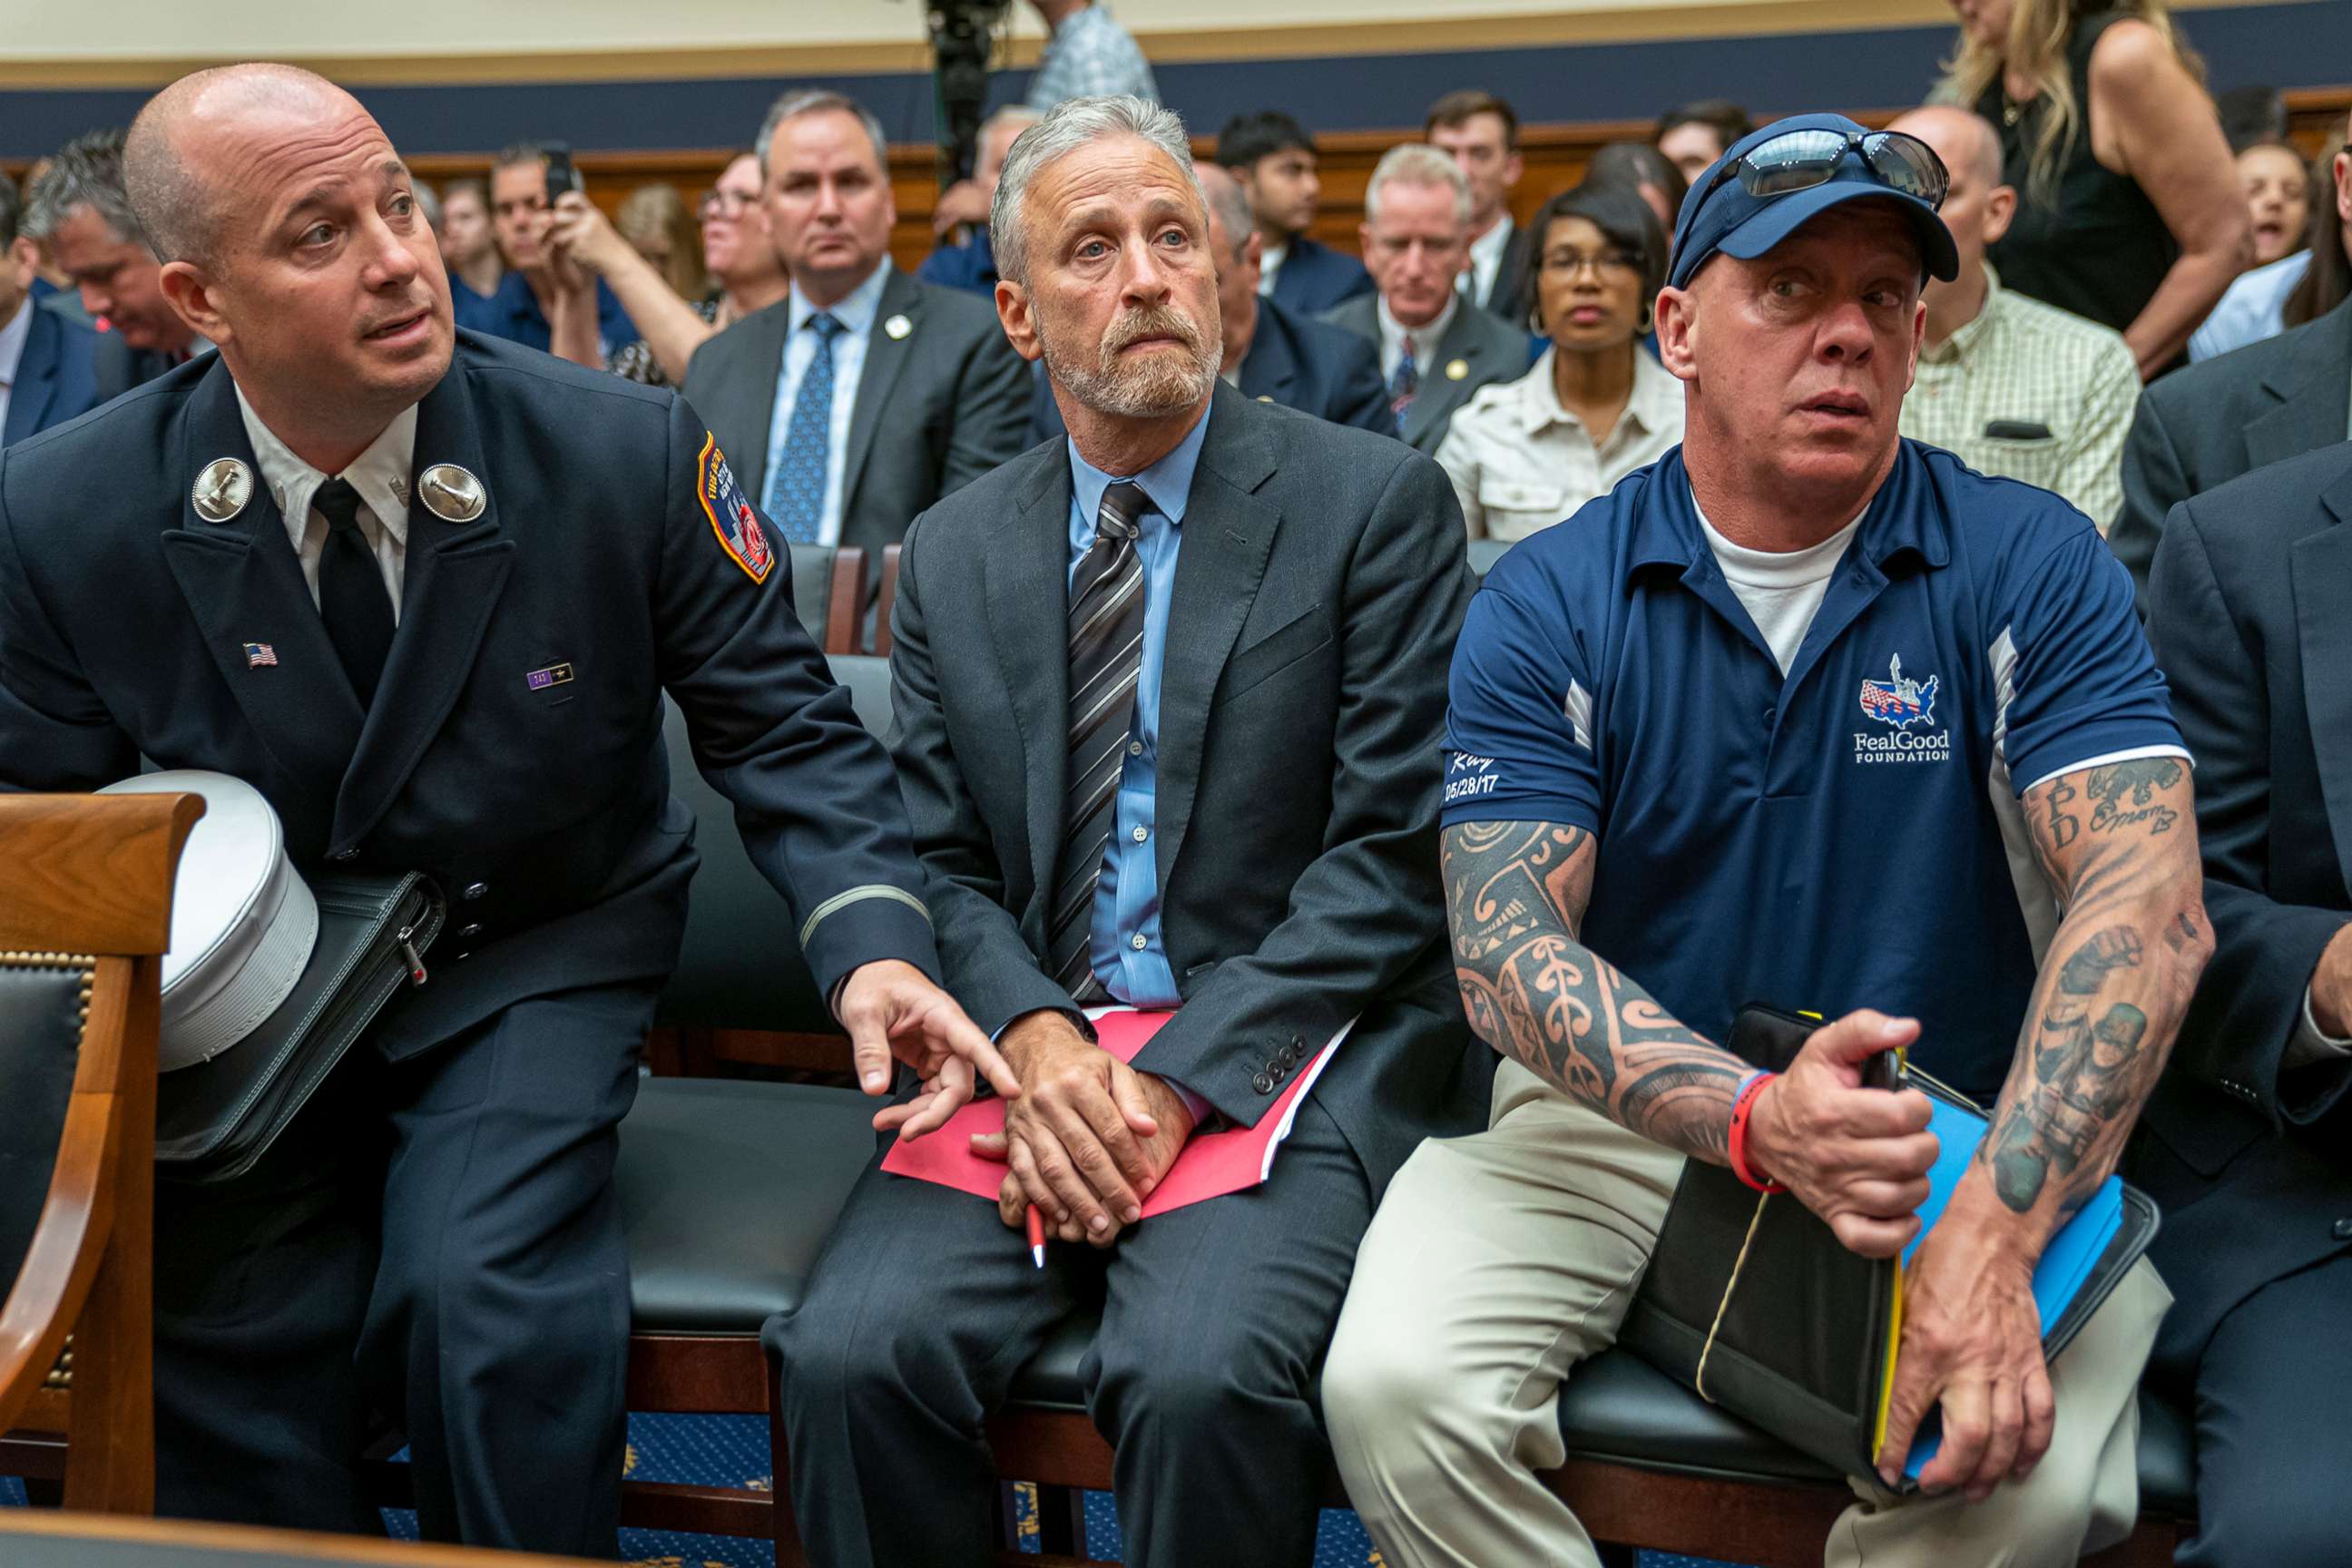 PHOTO: Entertainer and activist Jon Stewart lends his support to firefighters, first responders and survivors of the September 11 terror attacks at a hearing on Capitol Hill in Washington, June 11, 2019.